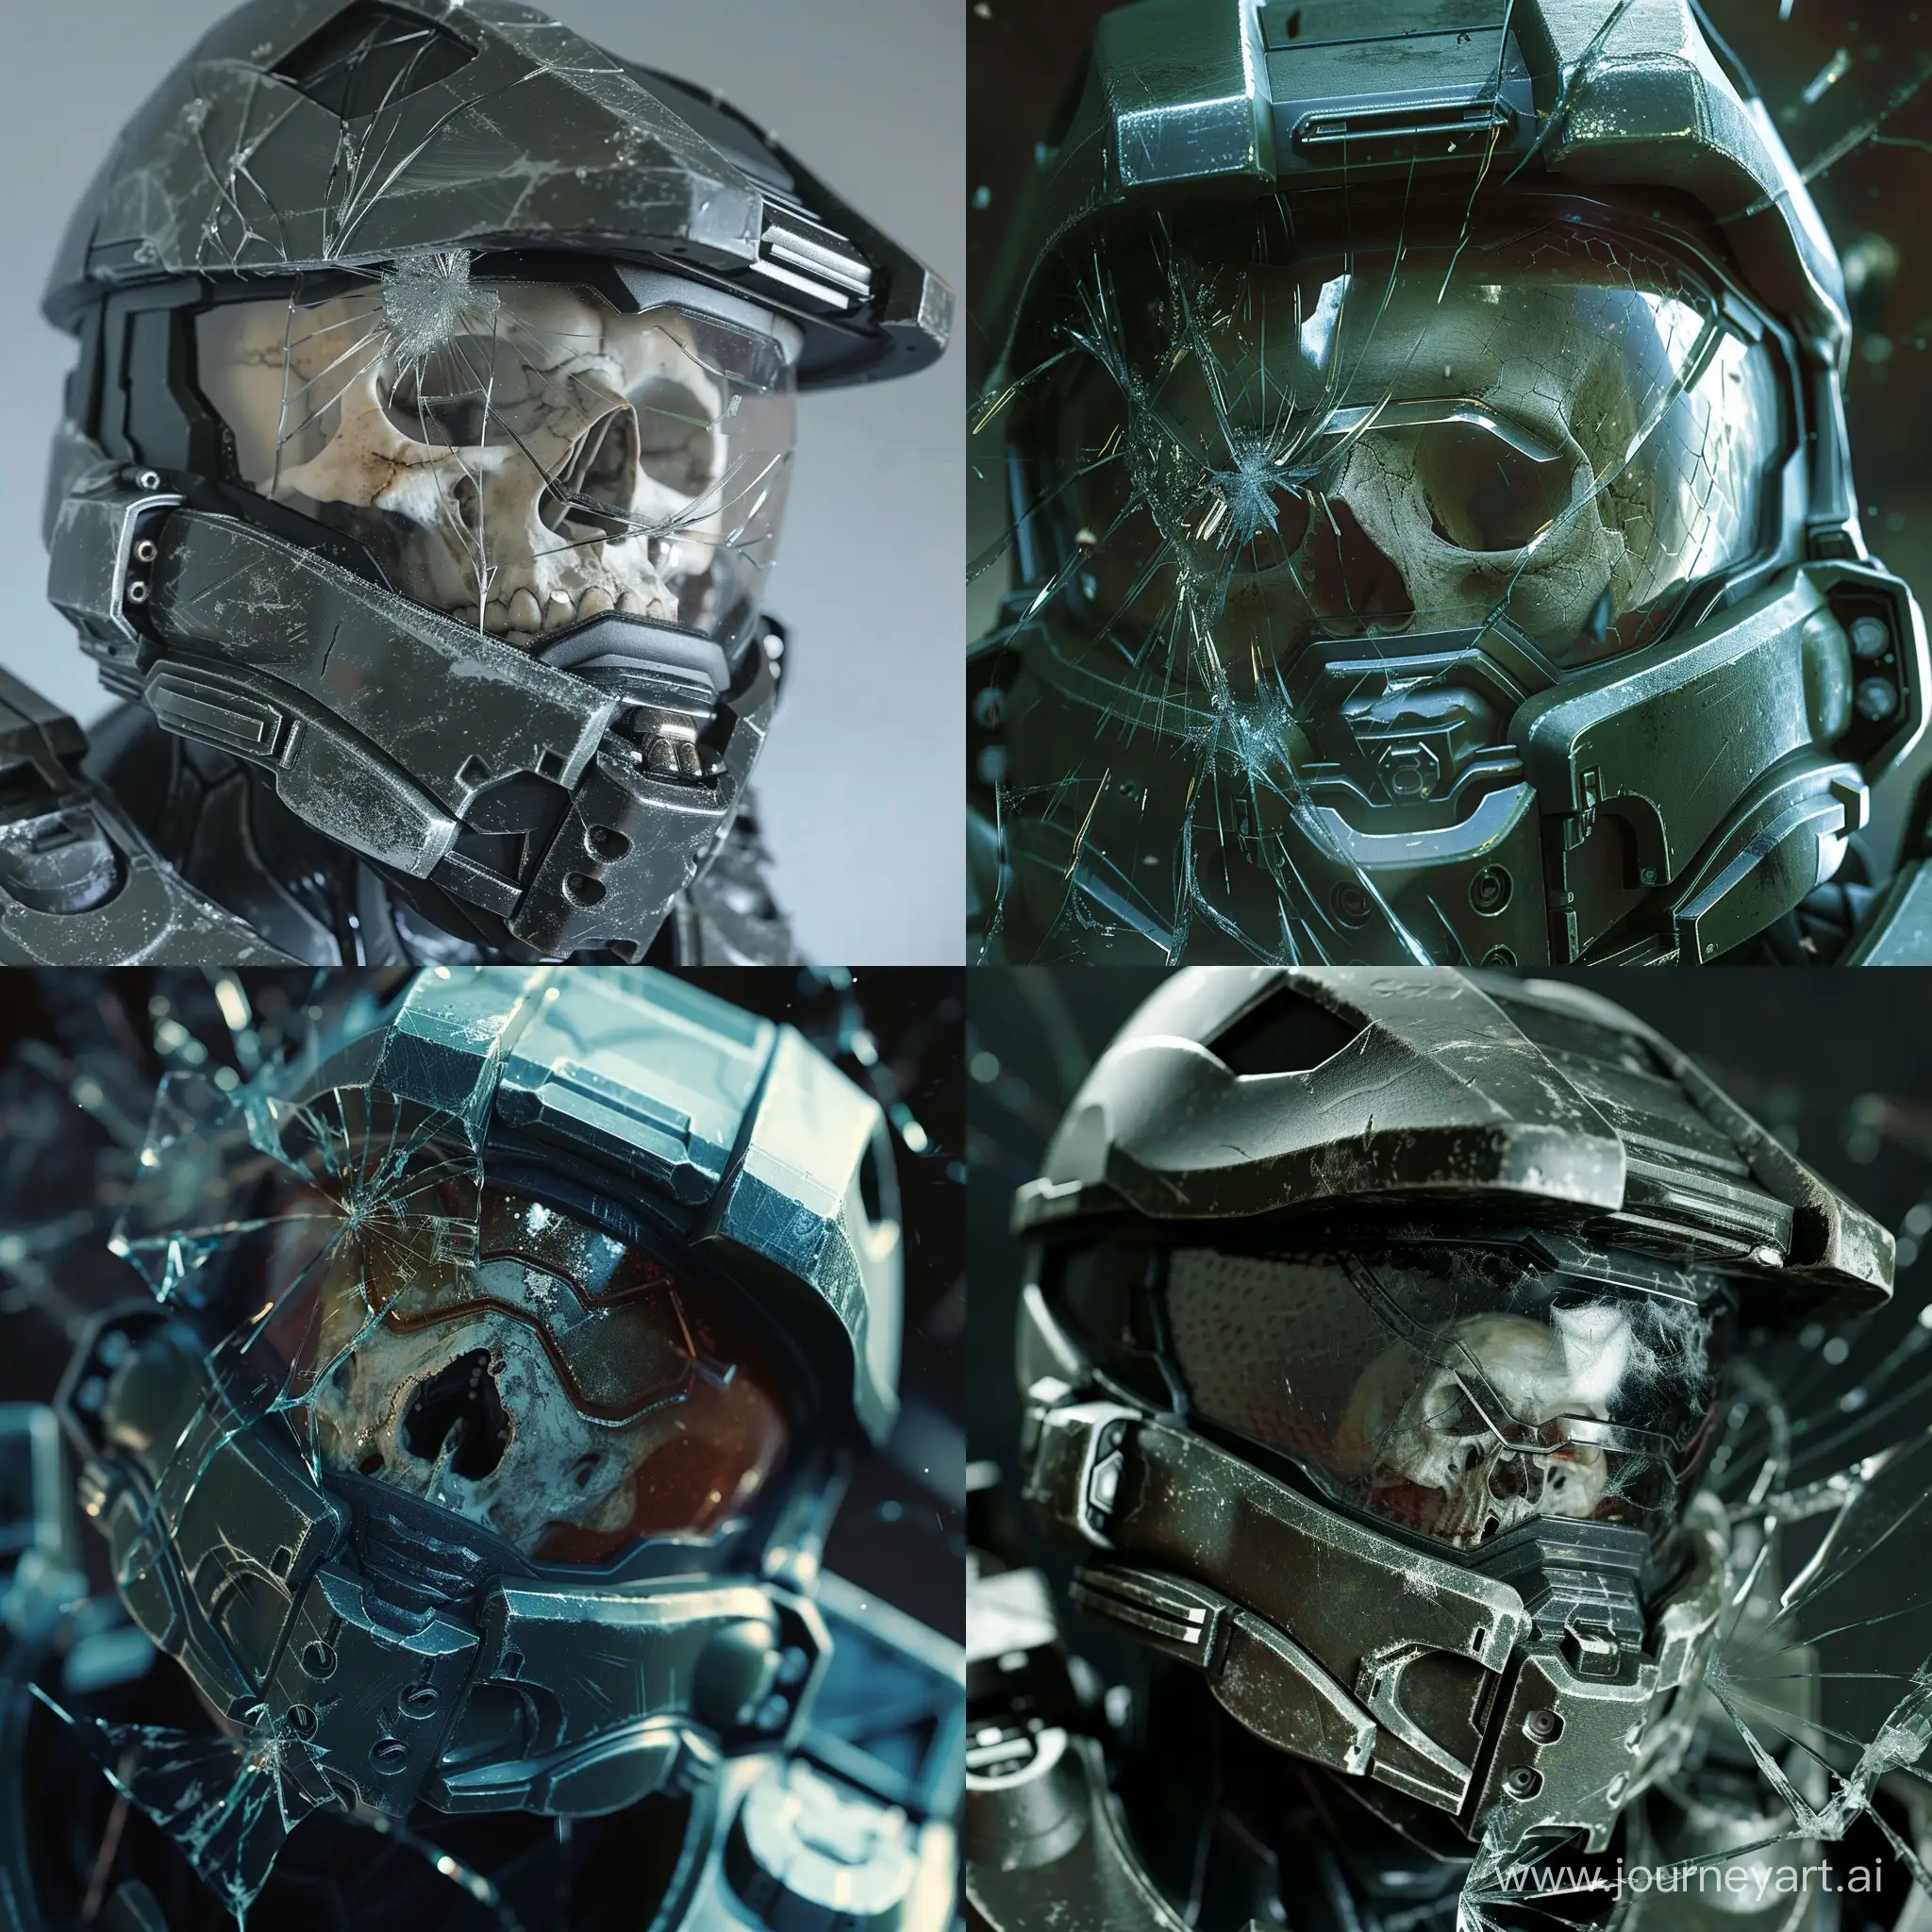 A close-up of the broken helmet of the Spartan from the Halo game with a broken glass, from under which the skull of the deceased is visible. The skull is also cracked
